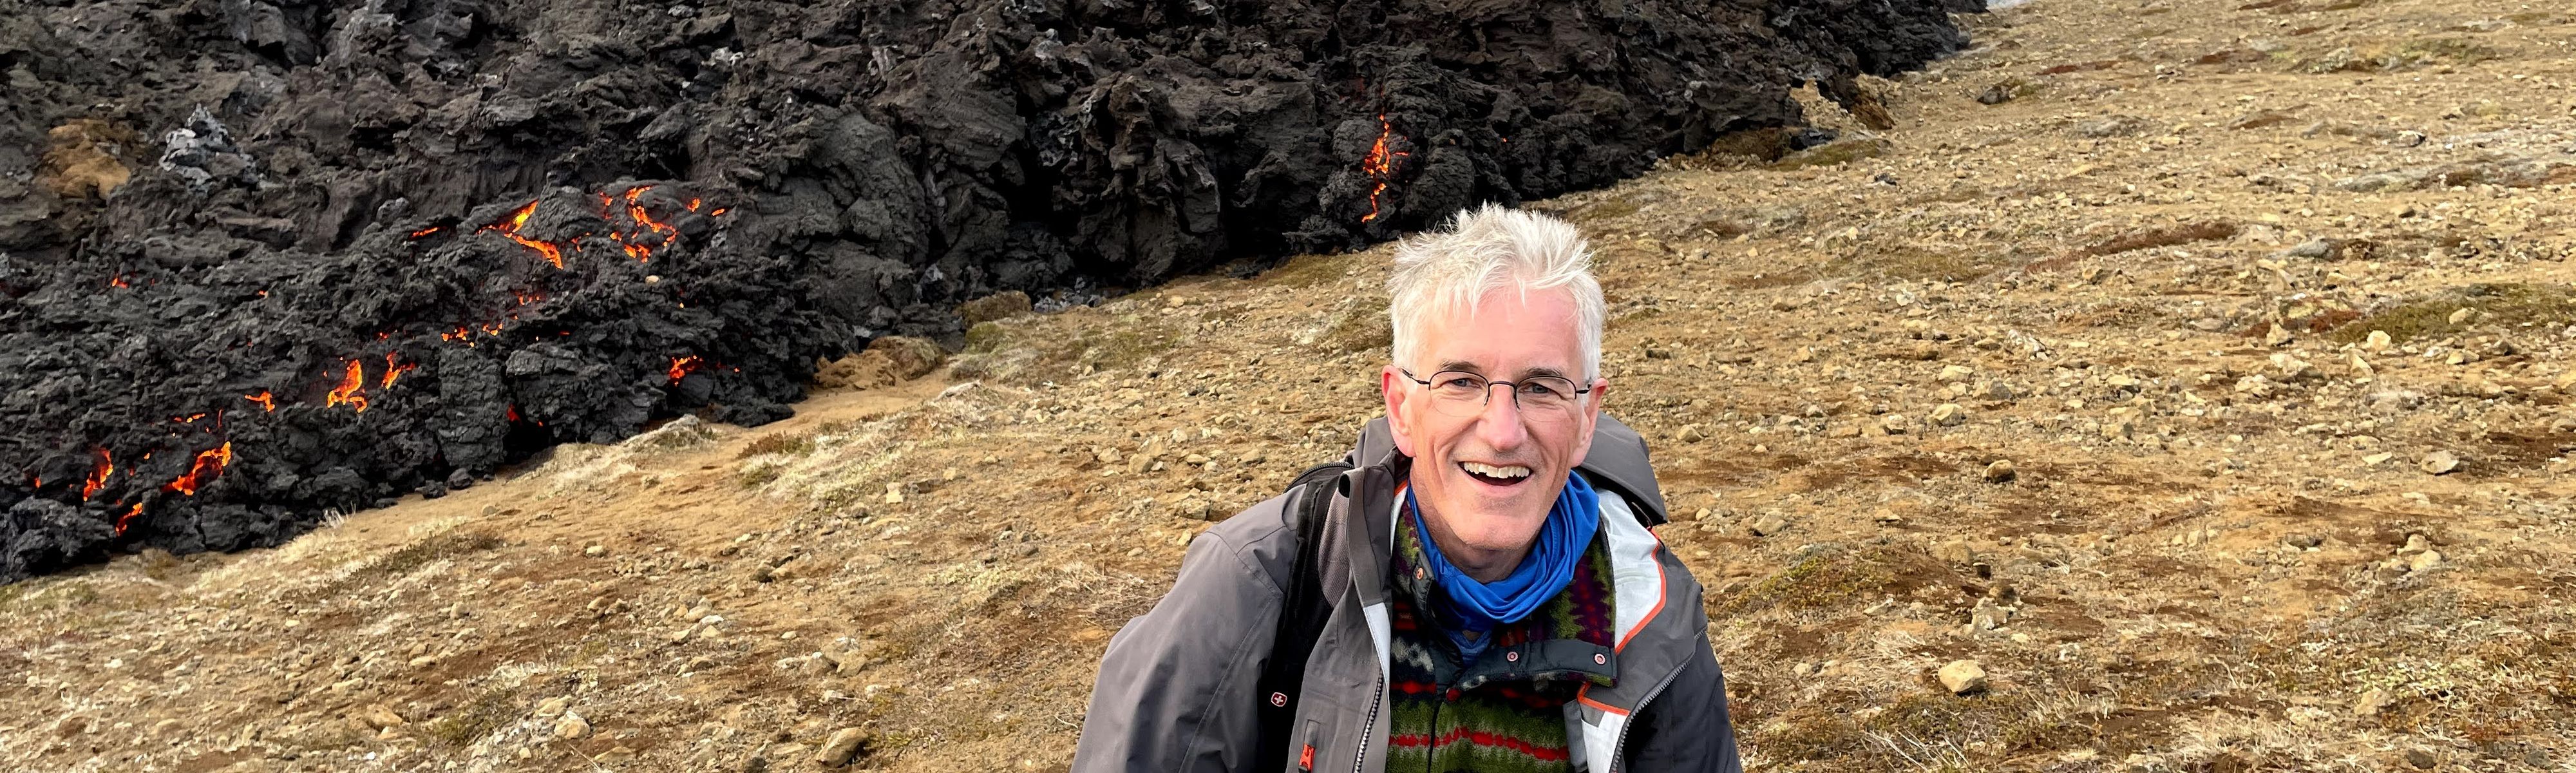 traveler smiling at camera in front of lava from volcano in iceland